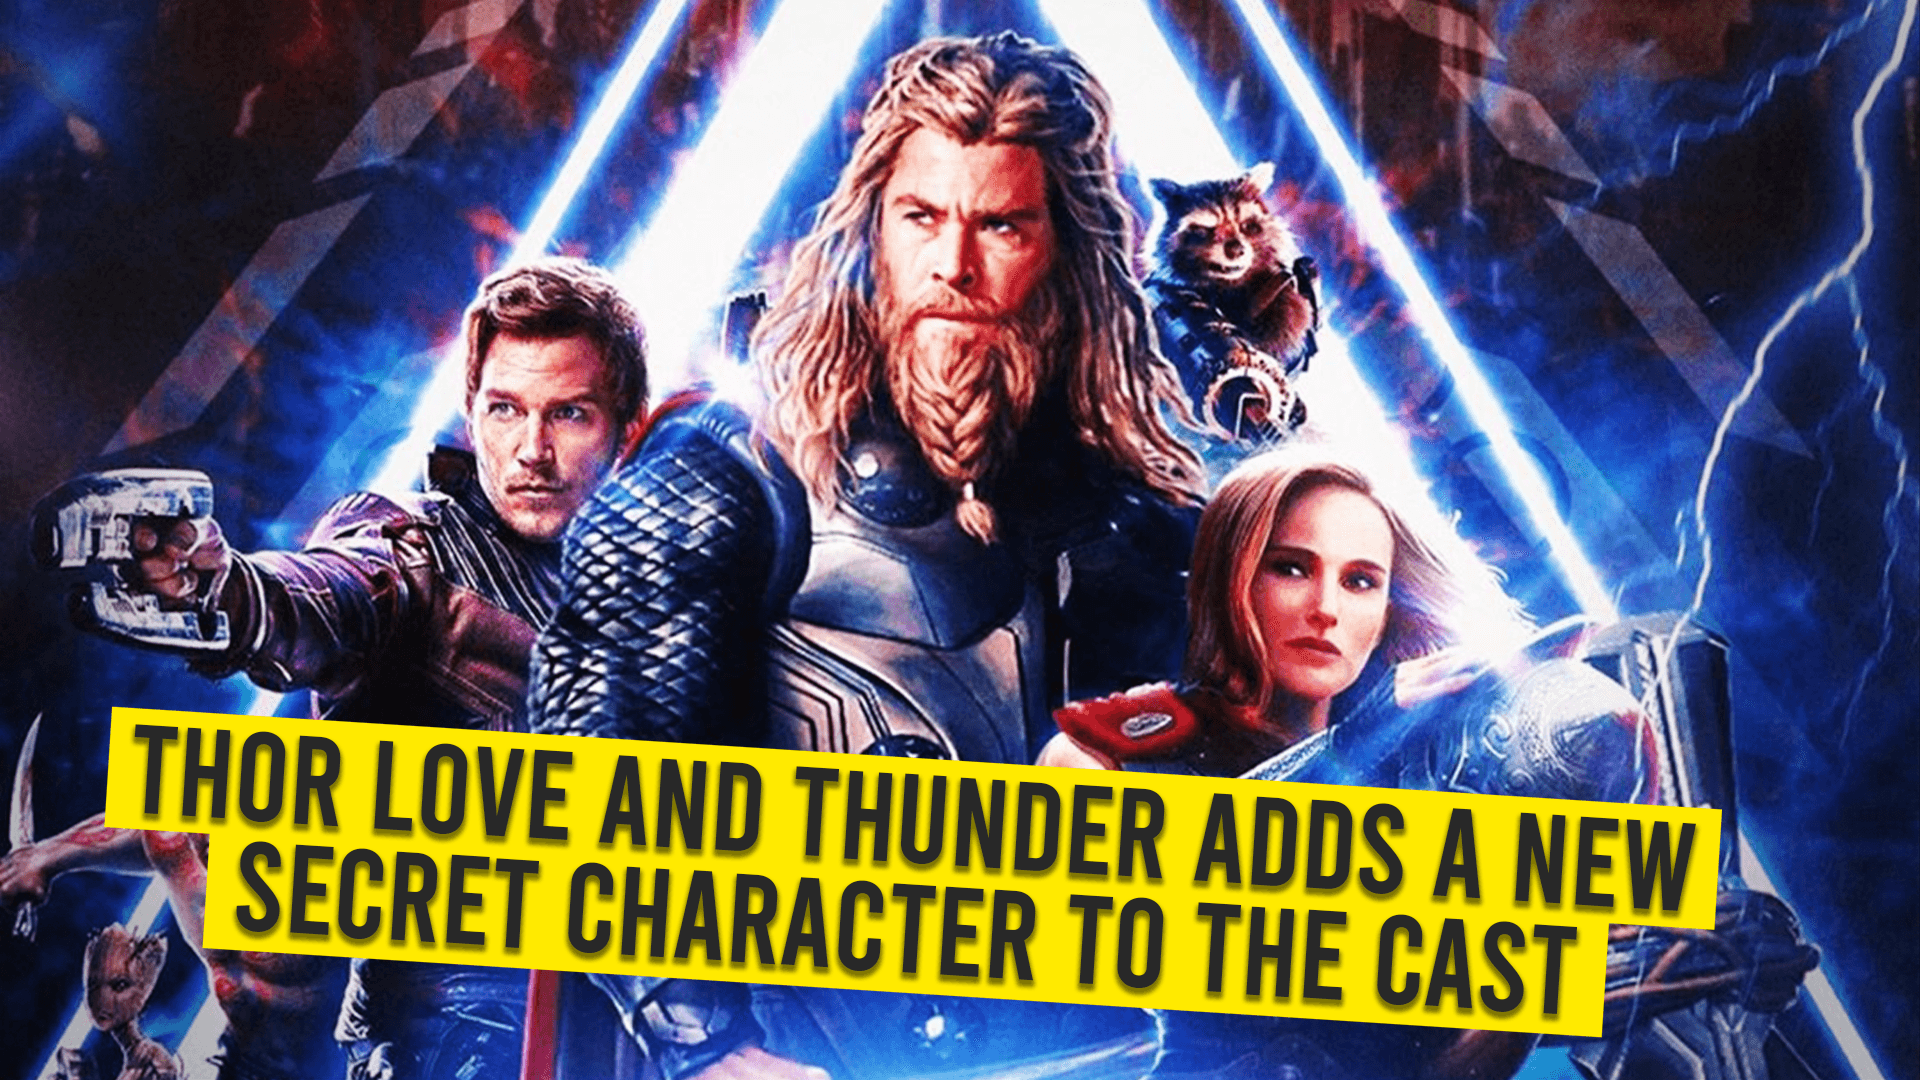 Thor Love And Thunder Adds A New Secret Character To The Cast